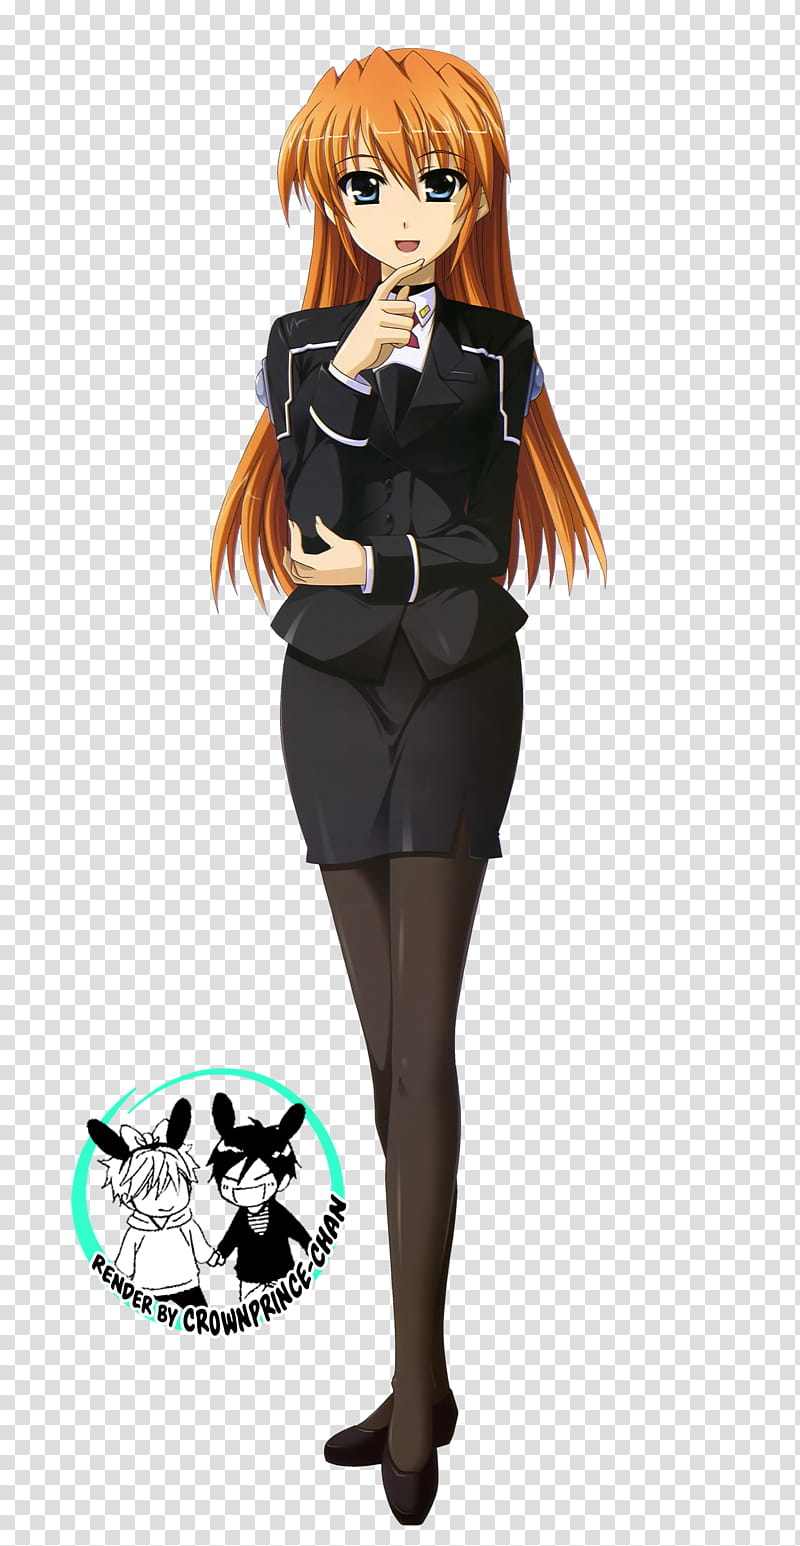 RENDER Teana Mahou Shoujo Lyrical Nanoha, woman standing and smiling illustration transparent background PNG clipart